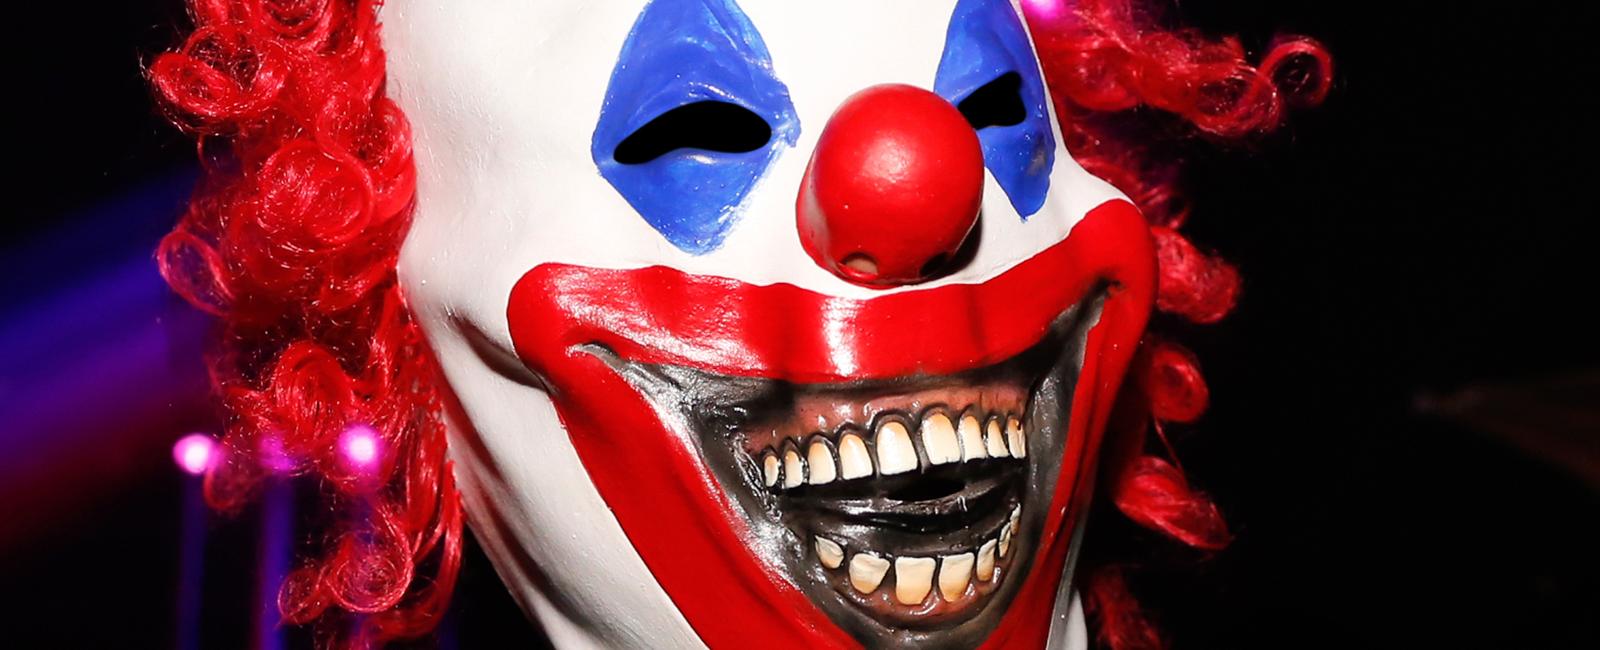 It is illegal to dress as a clown with the intent to cause alarm in connecticut